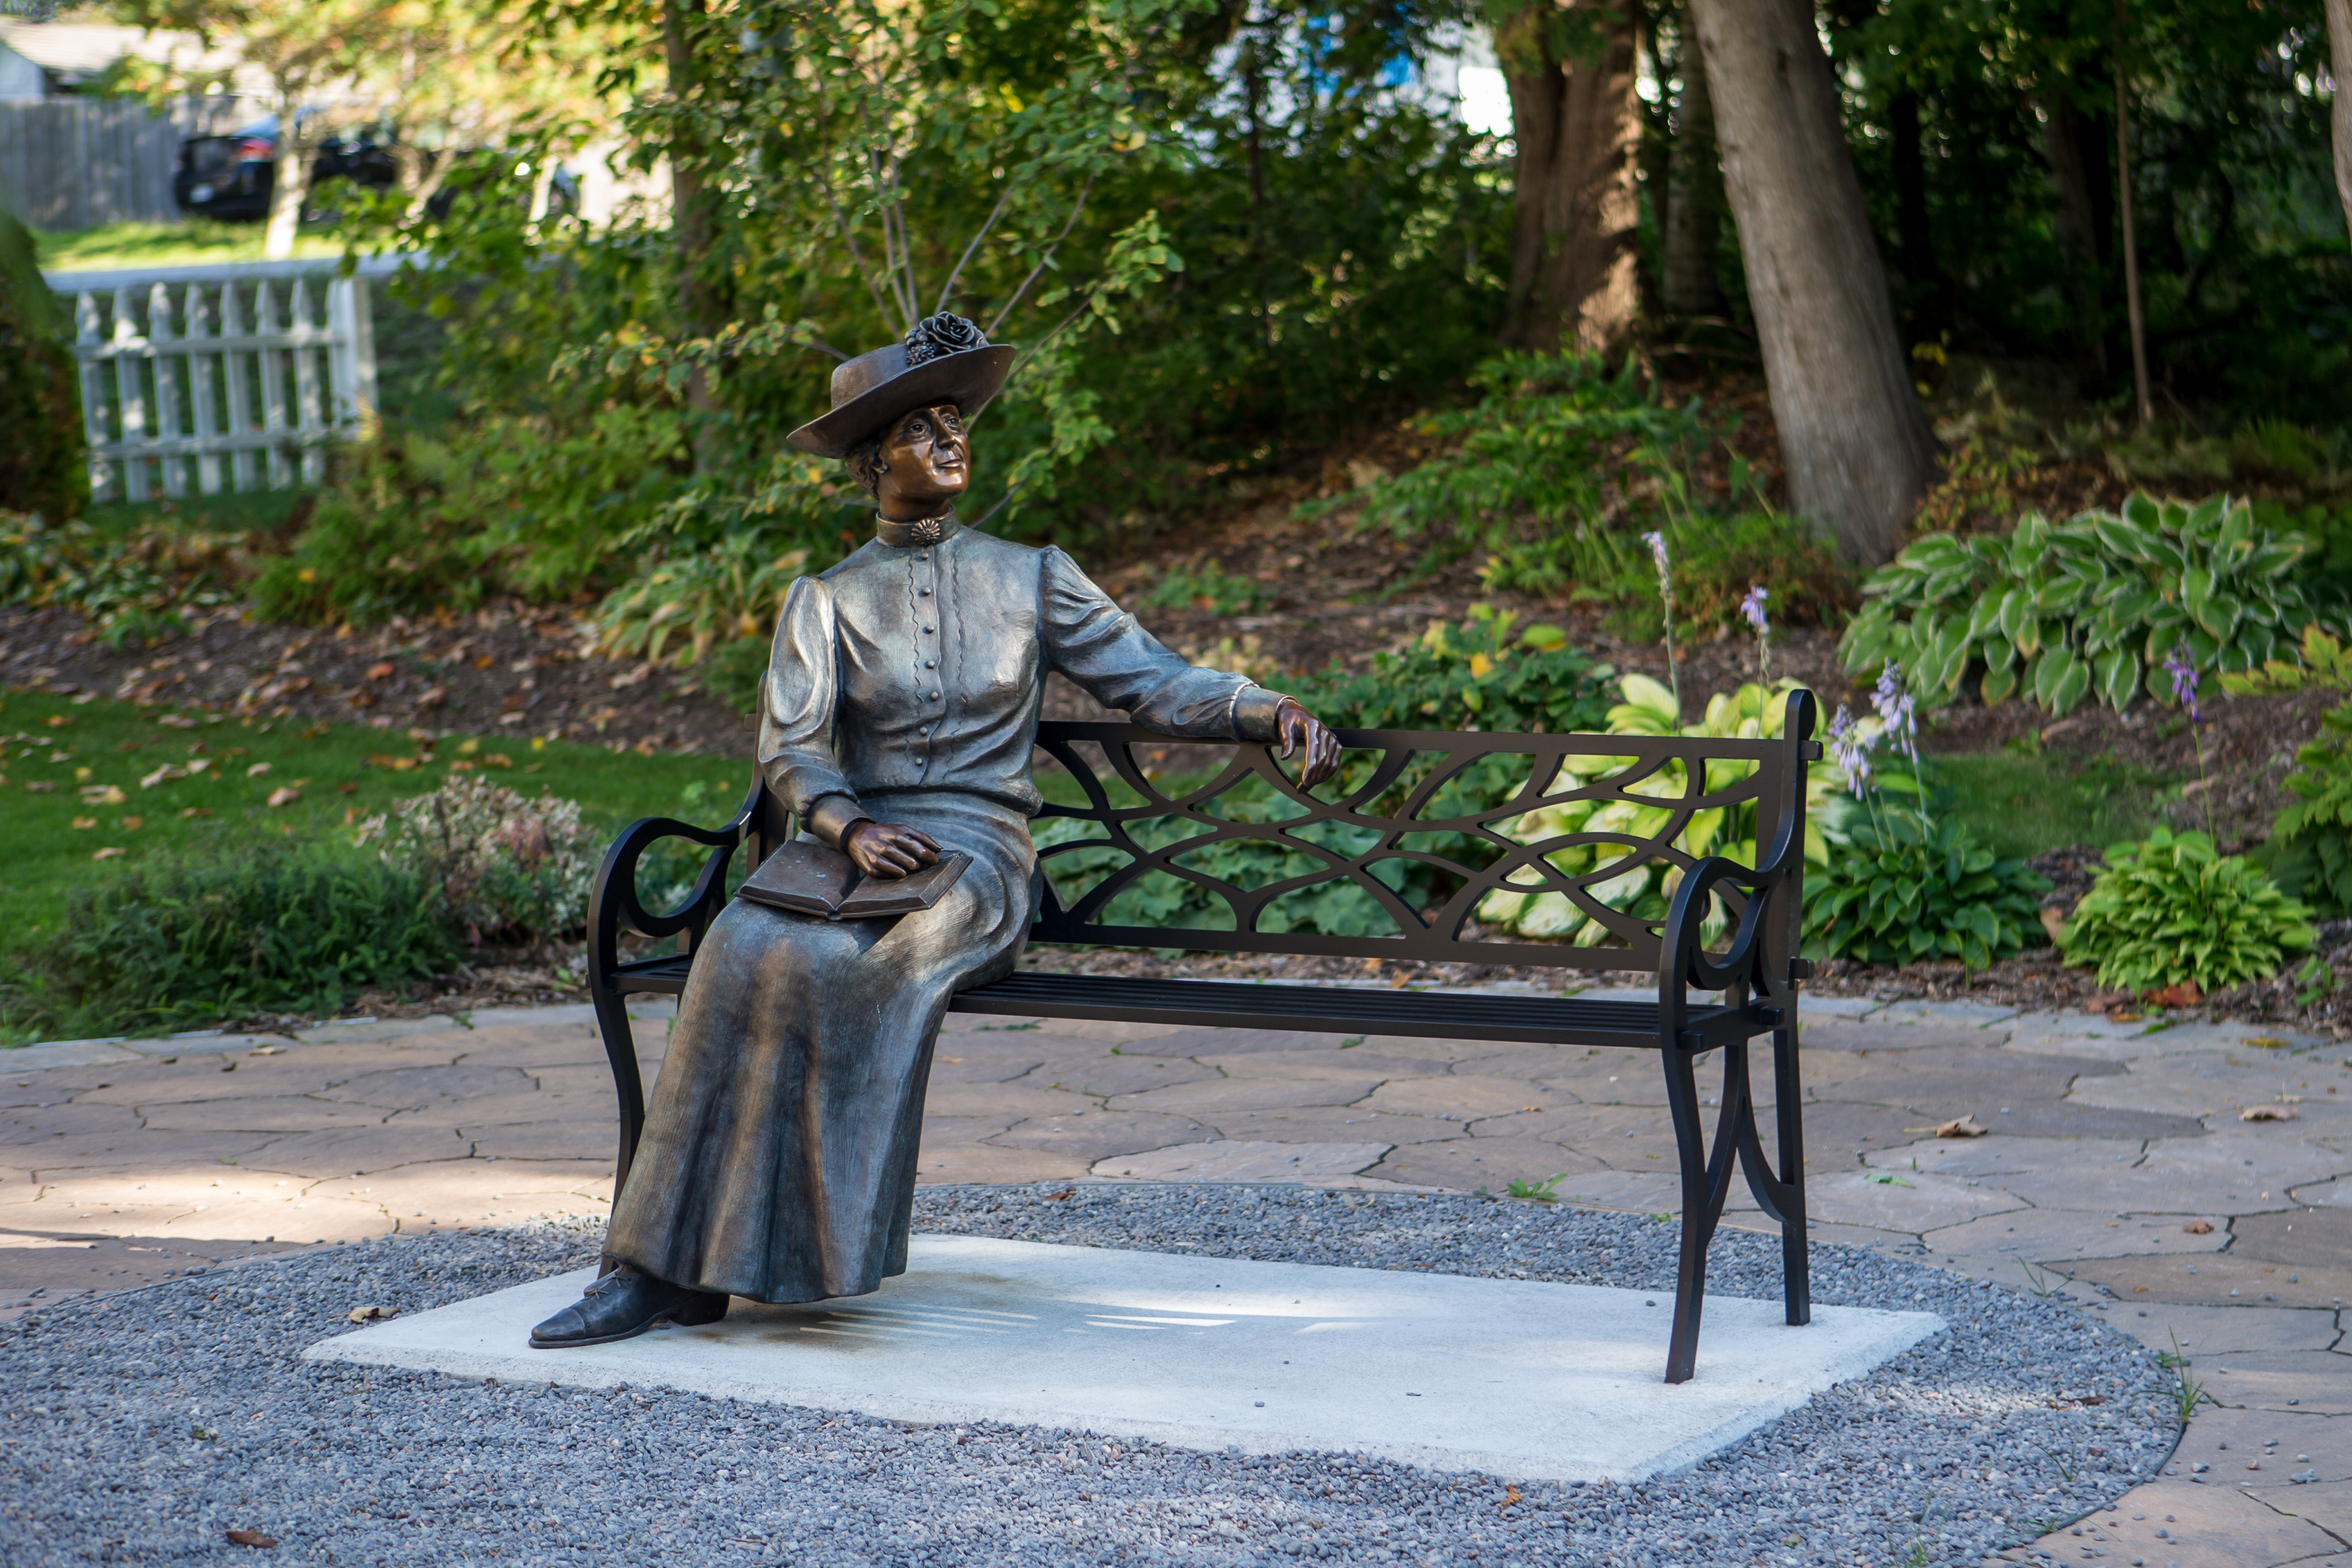 Image is of a bench that has a statue of Lucy Maud Montgomery with a book on her lap sitting on the left side of the bench. The right side of the bench is empty and is located in front of a garden and trees.